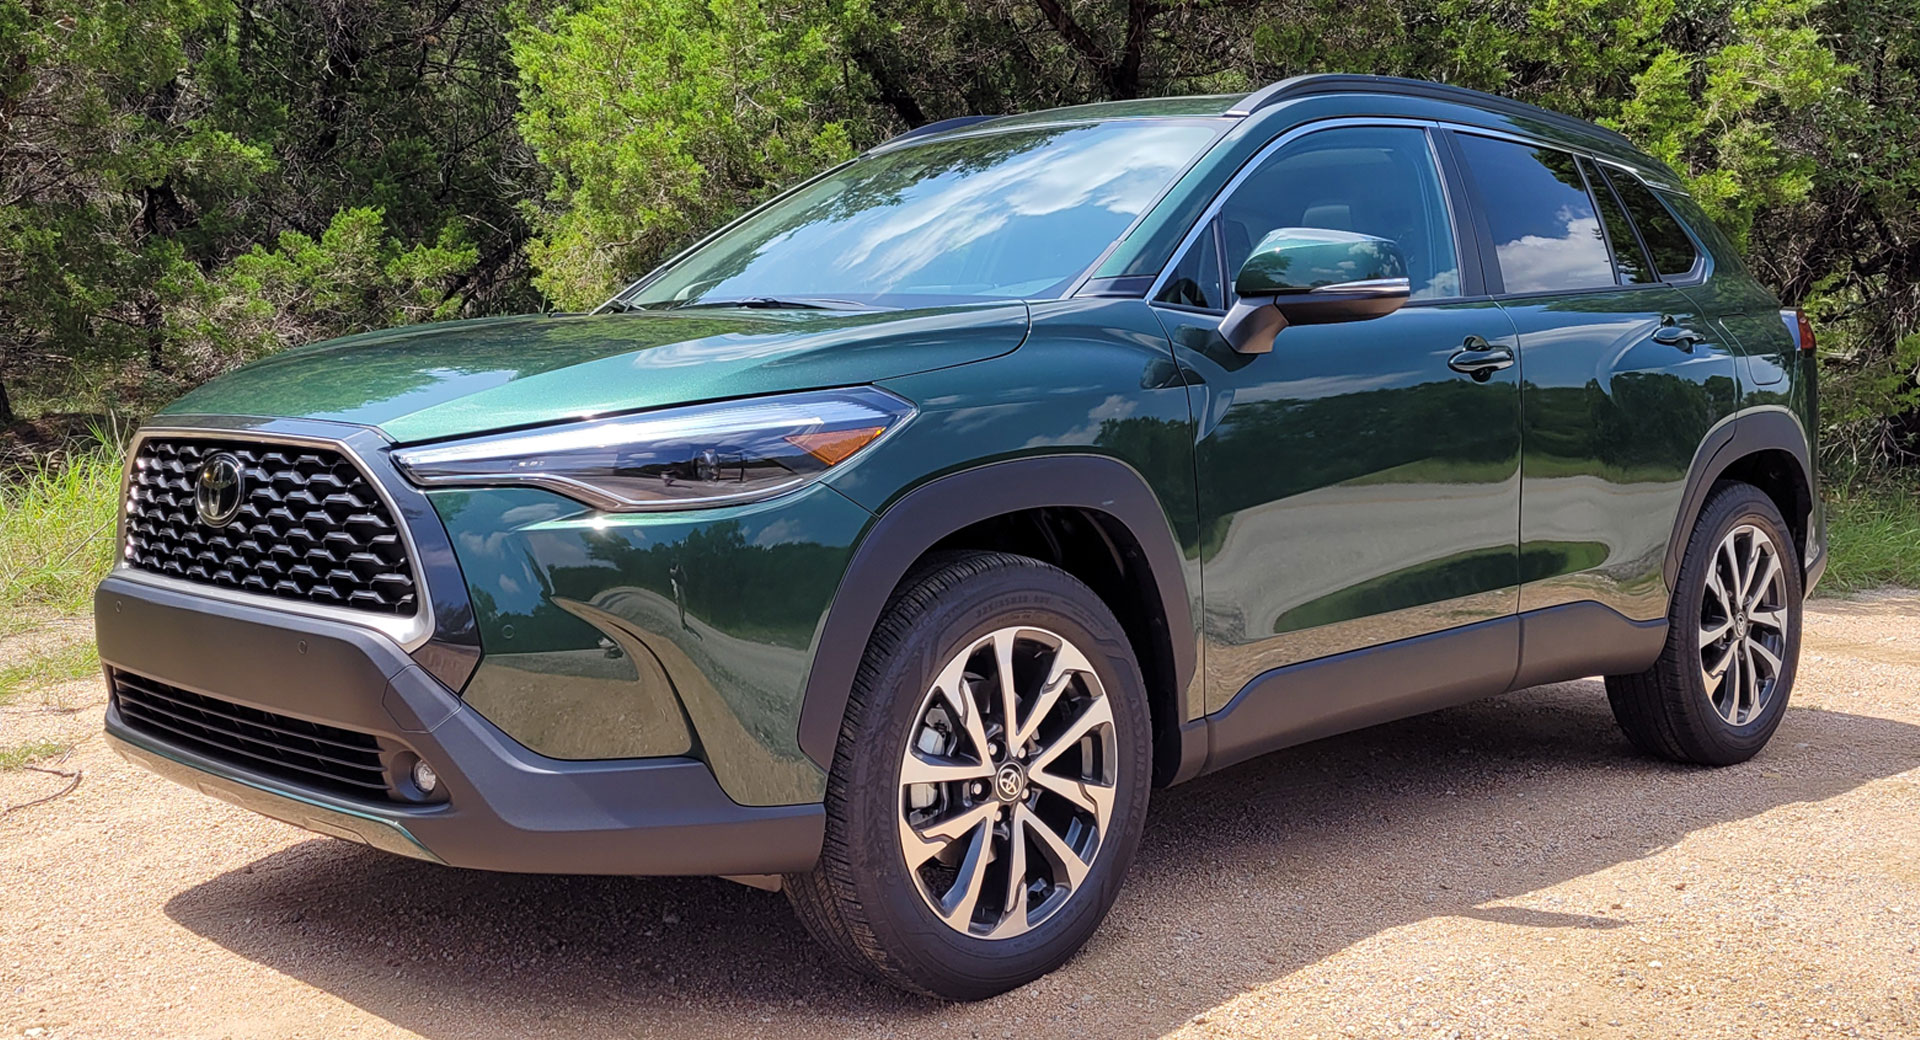 Pushed: 2022 Toyota Corolla Cross Builds On Sedan’s Legacy Of Affordability And Refinement Auto Recent